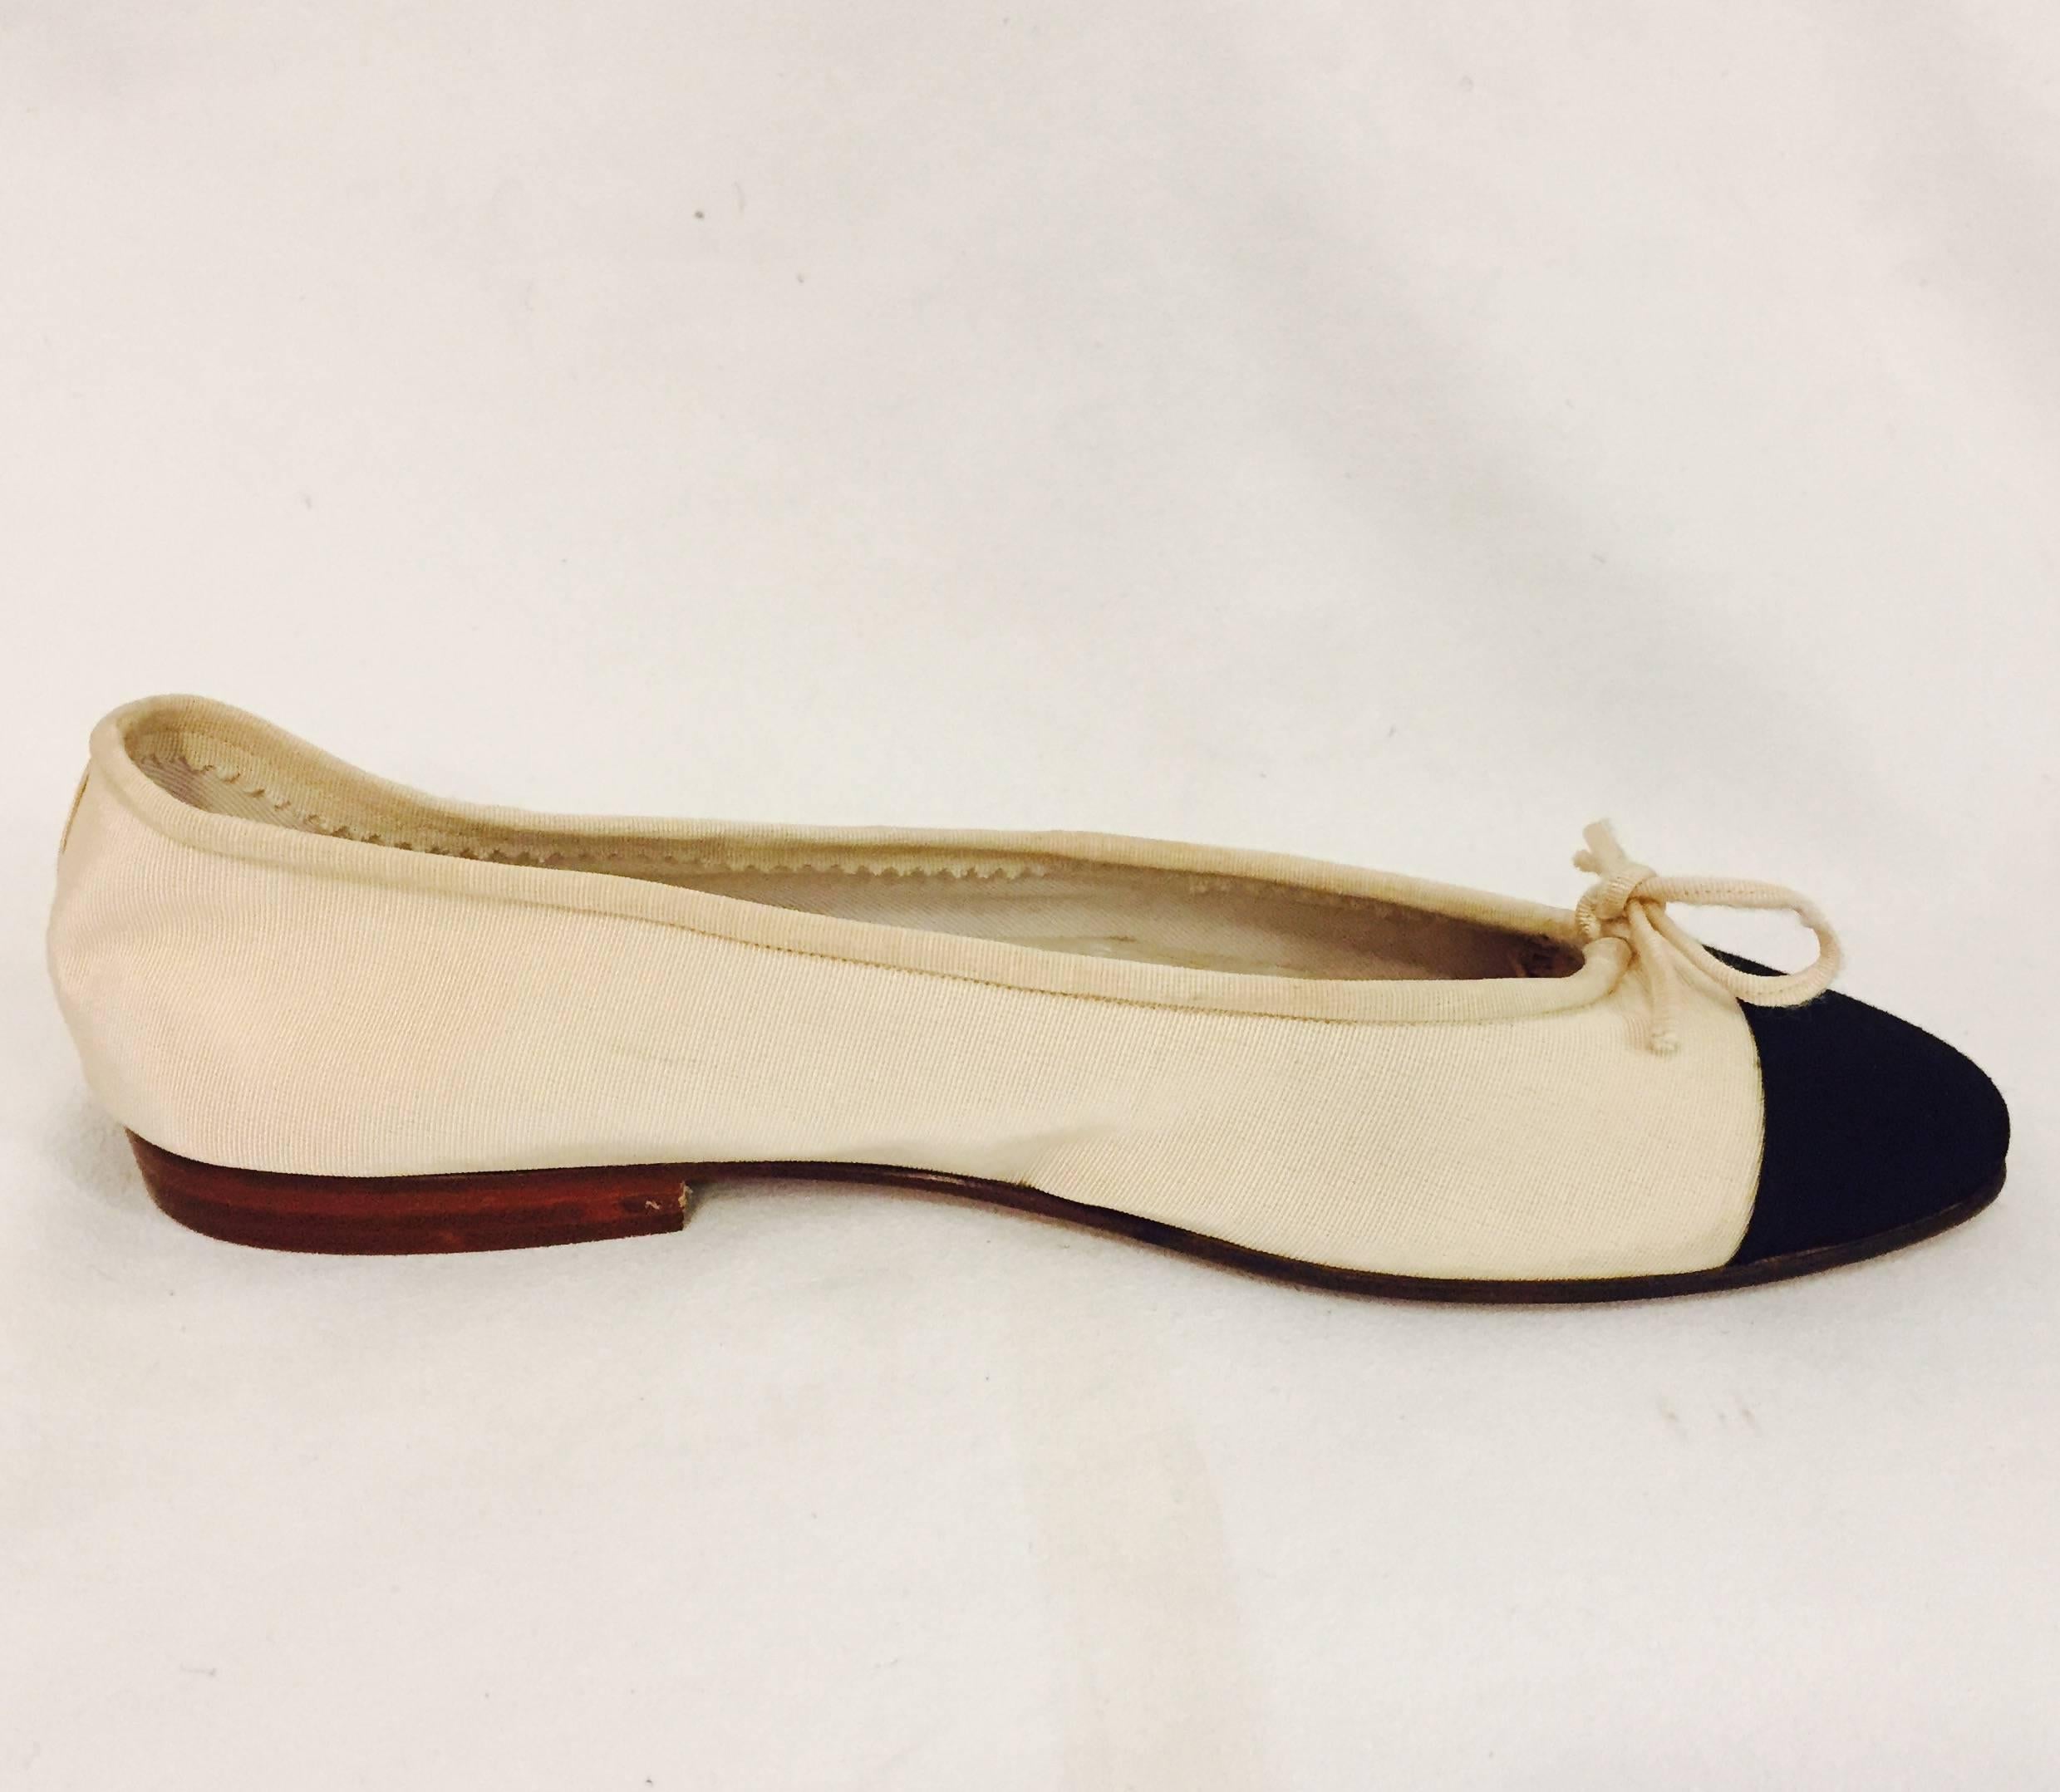 Chanel shoes are highly coveted!  Especially these beautifully crafted grosgrain ballet flats in beige and black with iconic cap toes!   A  grosgrain cord ties into a bow and finishes the look!  Leather soles, insoles, and lining.  In excellent,